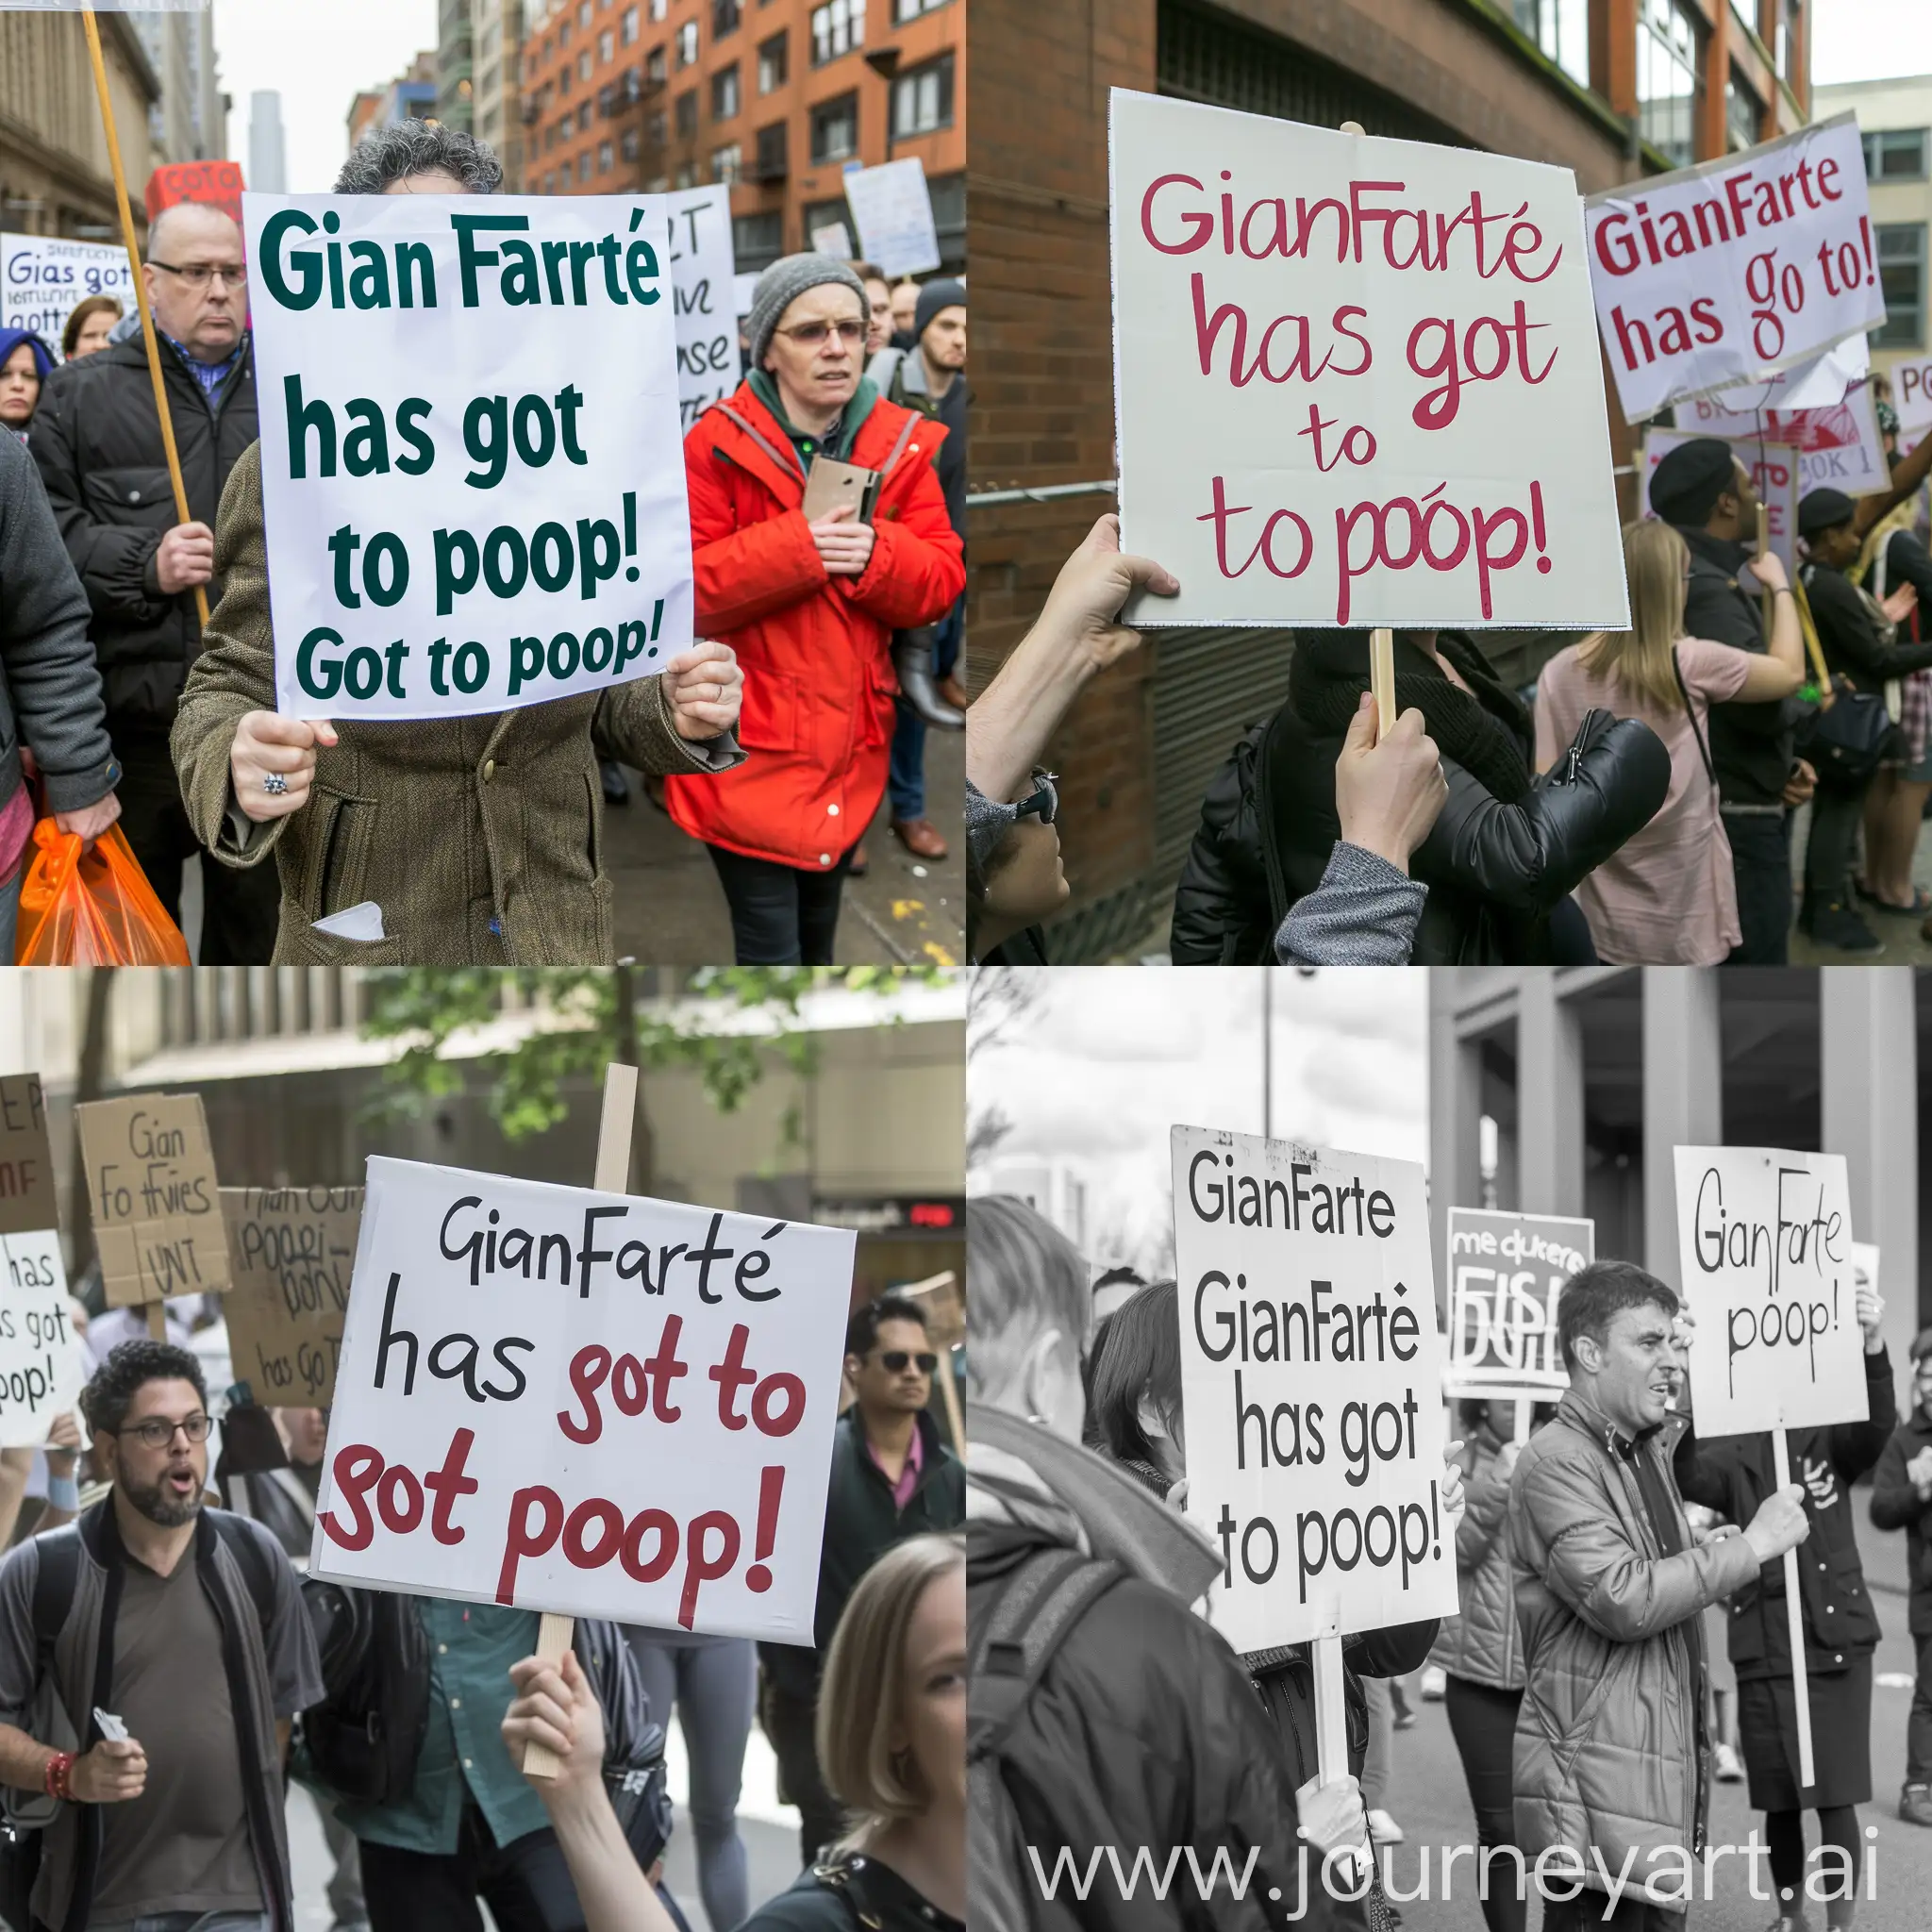 Picket signs with people holding them. Picket sign reads “GianFarté has got to poop!”